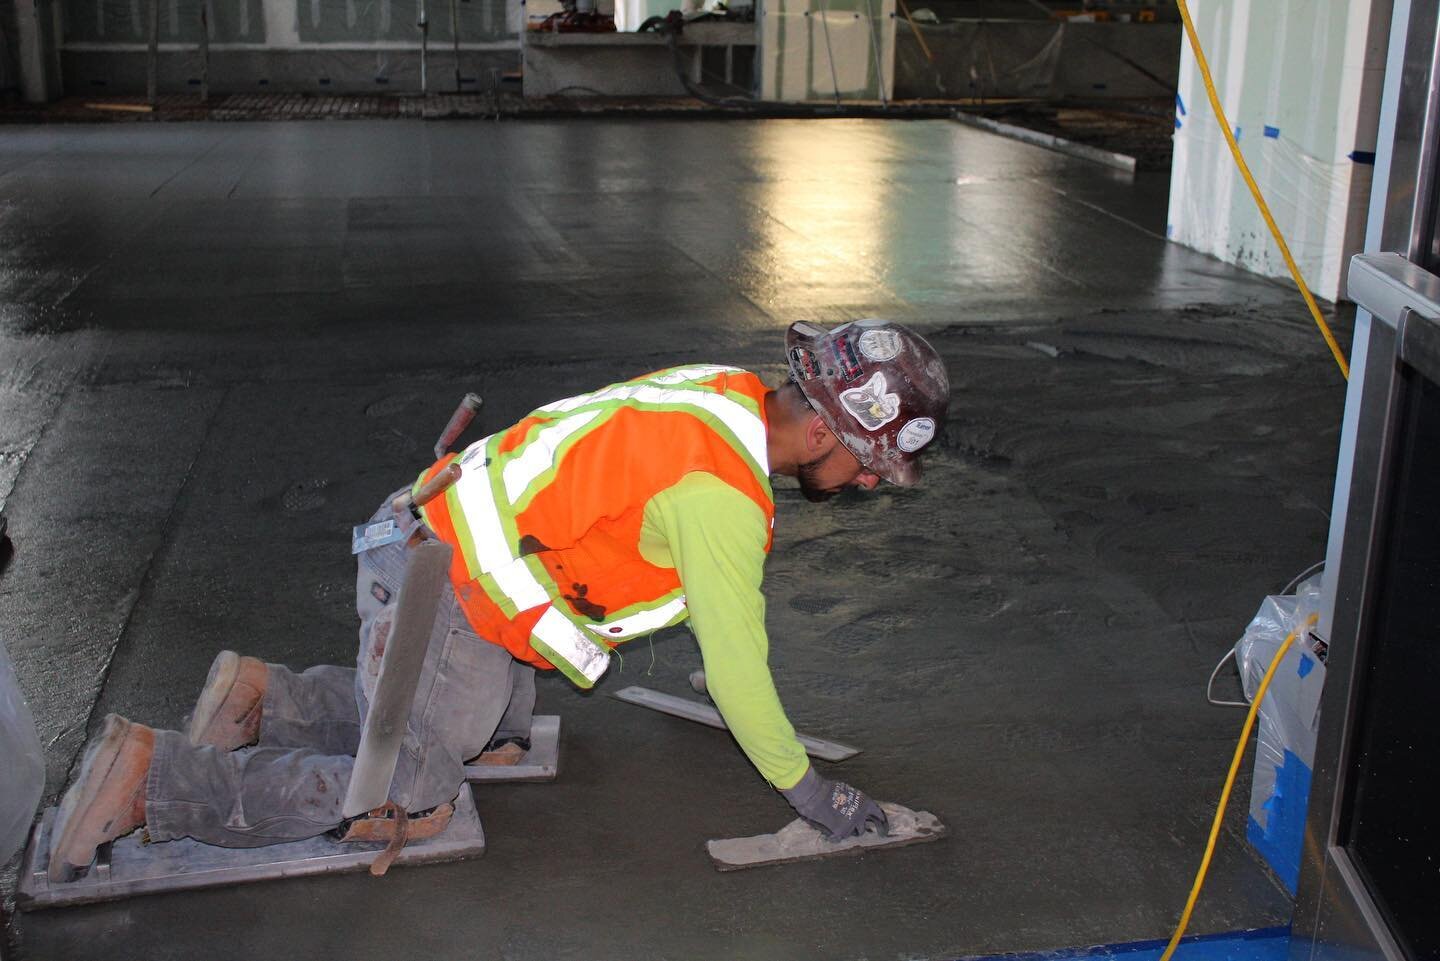 🚧🚧 Do you use knee boards?? Why or why not?? 🚧🚧

Benefits of knee boards :

➕ starts the finishing process early 

➕ reaches distant areas of concrete slab that can&rsquo;t be reached from the edge

➕ can be used to crawl out and hand trowel whil